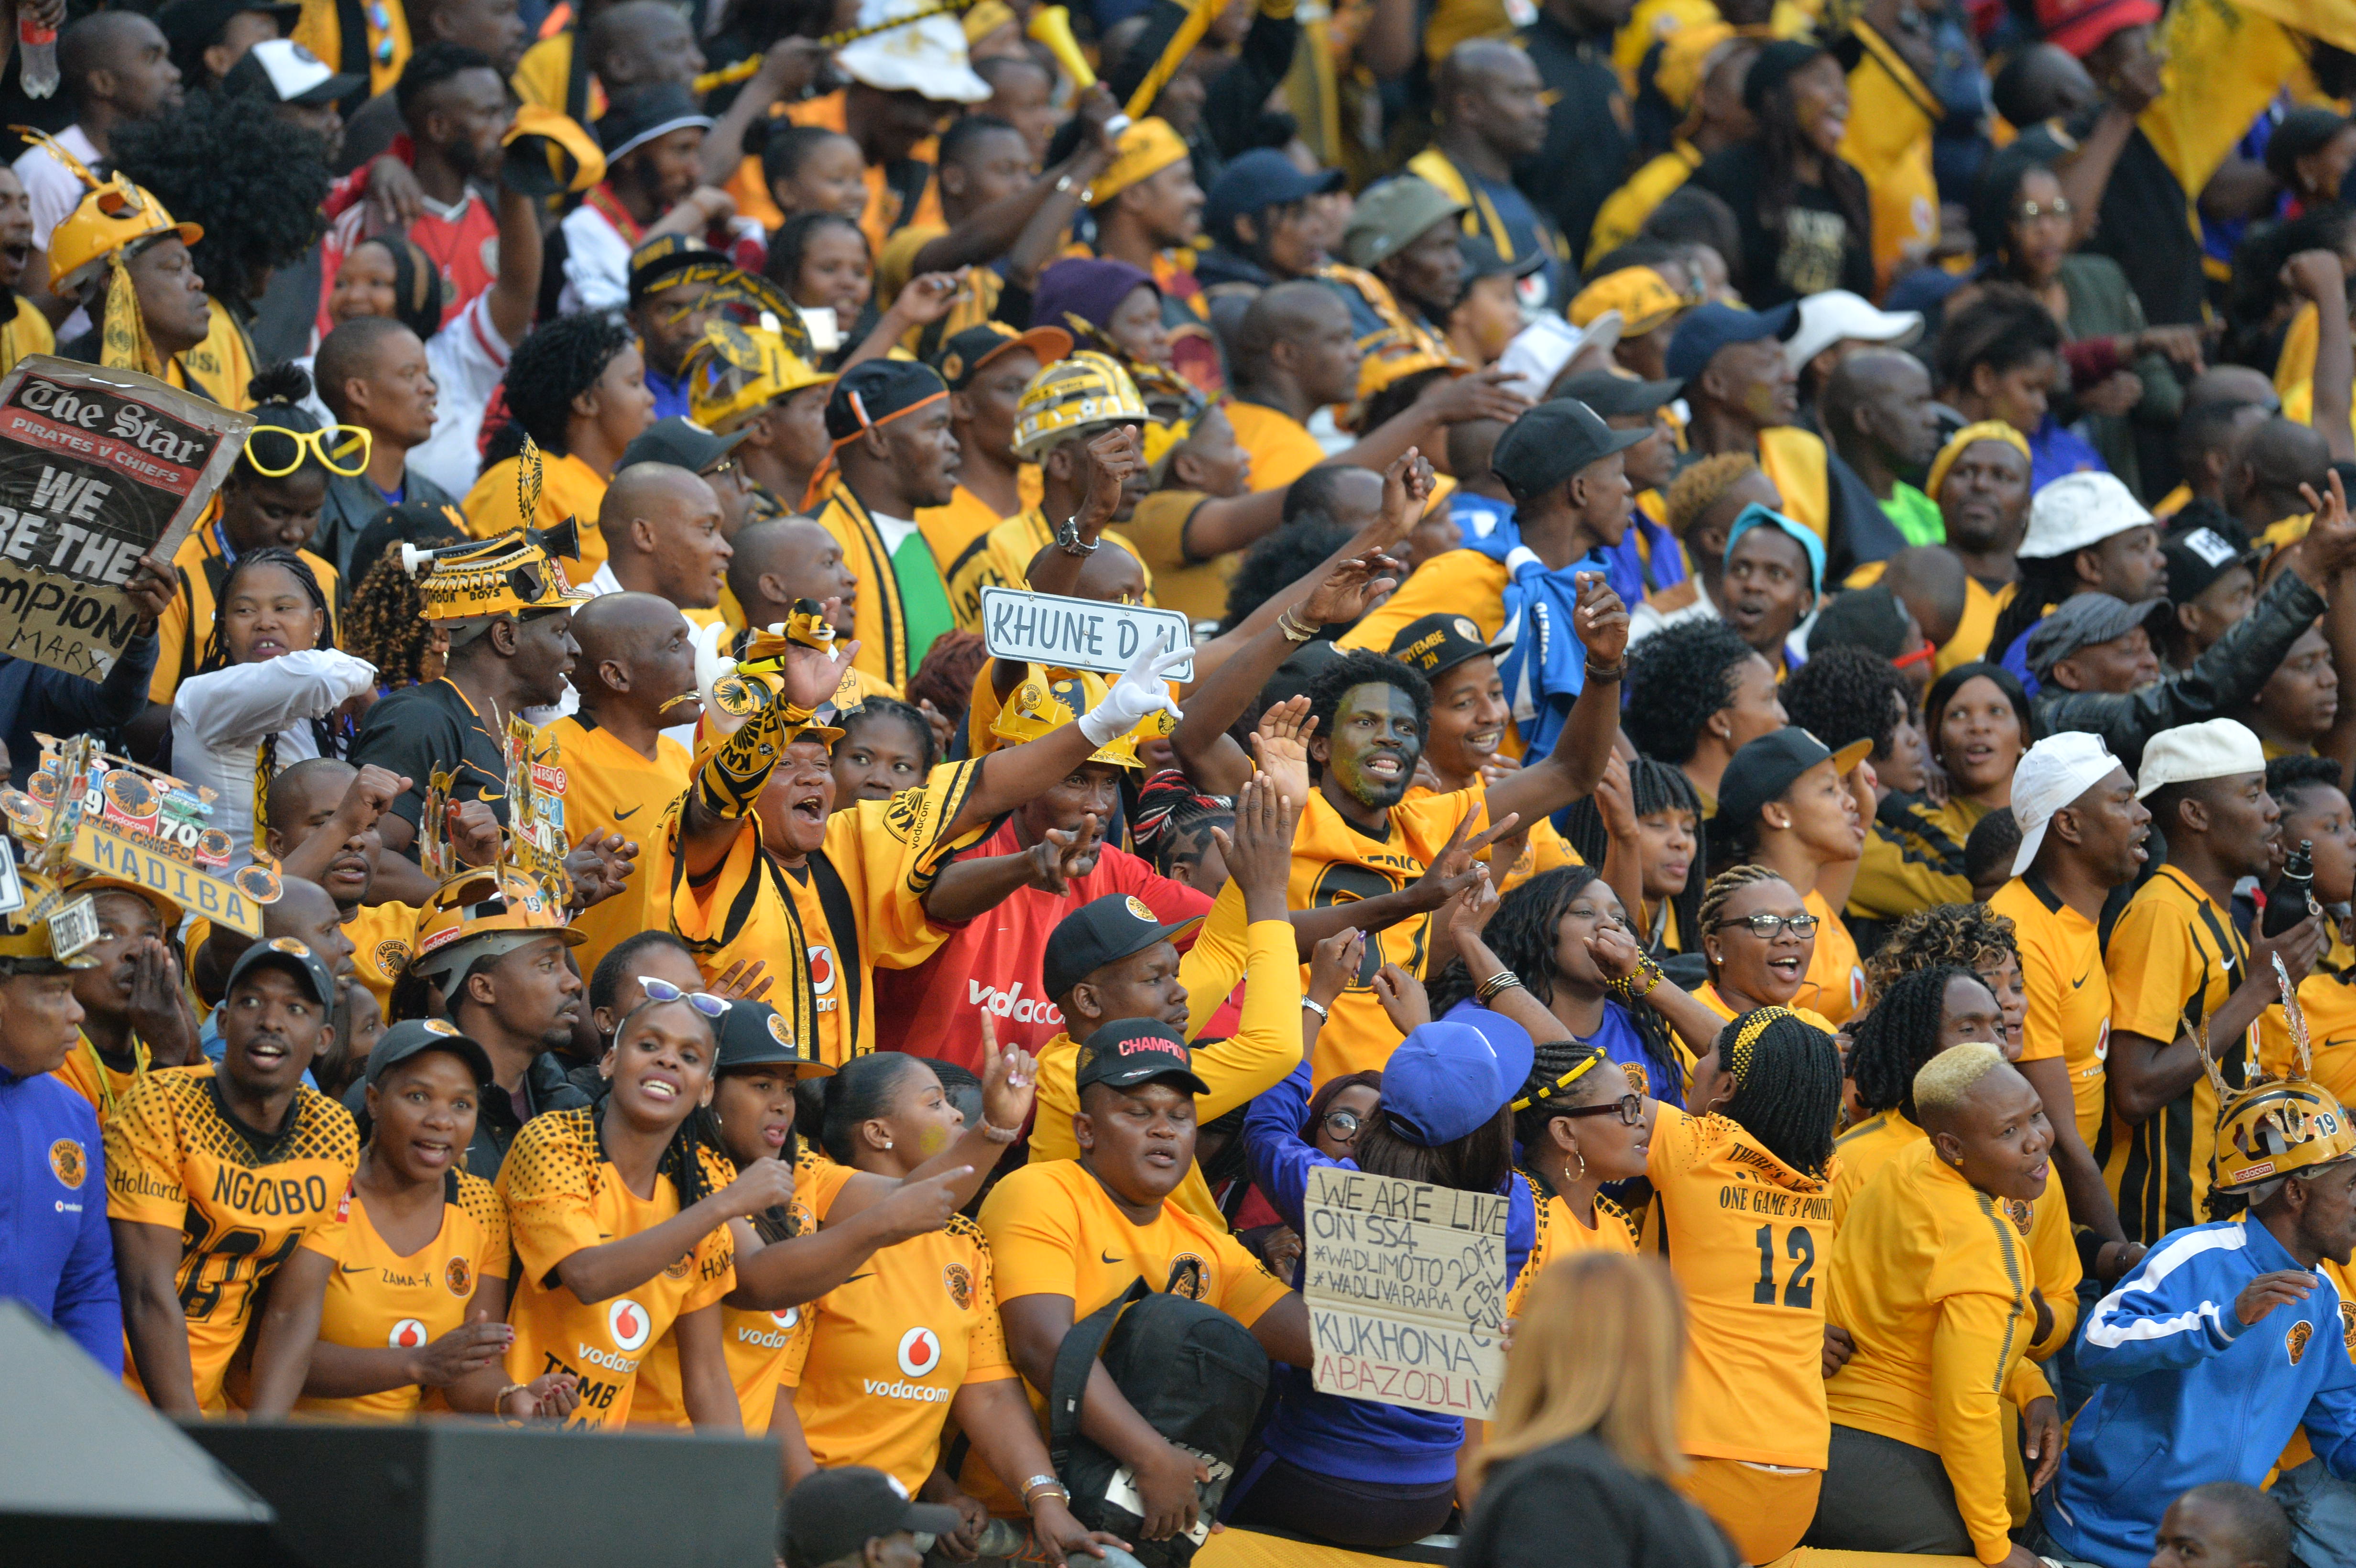 JOHANNESBURG, SOUTH AFRICA - JULY 29: Fans during the Carling Black Label Champion Cup match between Orlando Pirates and Kaizer Chiefs at FNB Stadium on July 29, 2017 in Johannesburg, South Africa. At least two people have been reported to have been killed and several injured in a crush during the game at South Africa's biggest stadium. (Photo by Lefty Shivambu/Gallo Images/Getty Images)